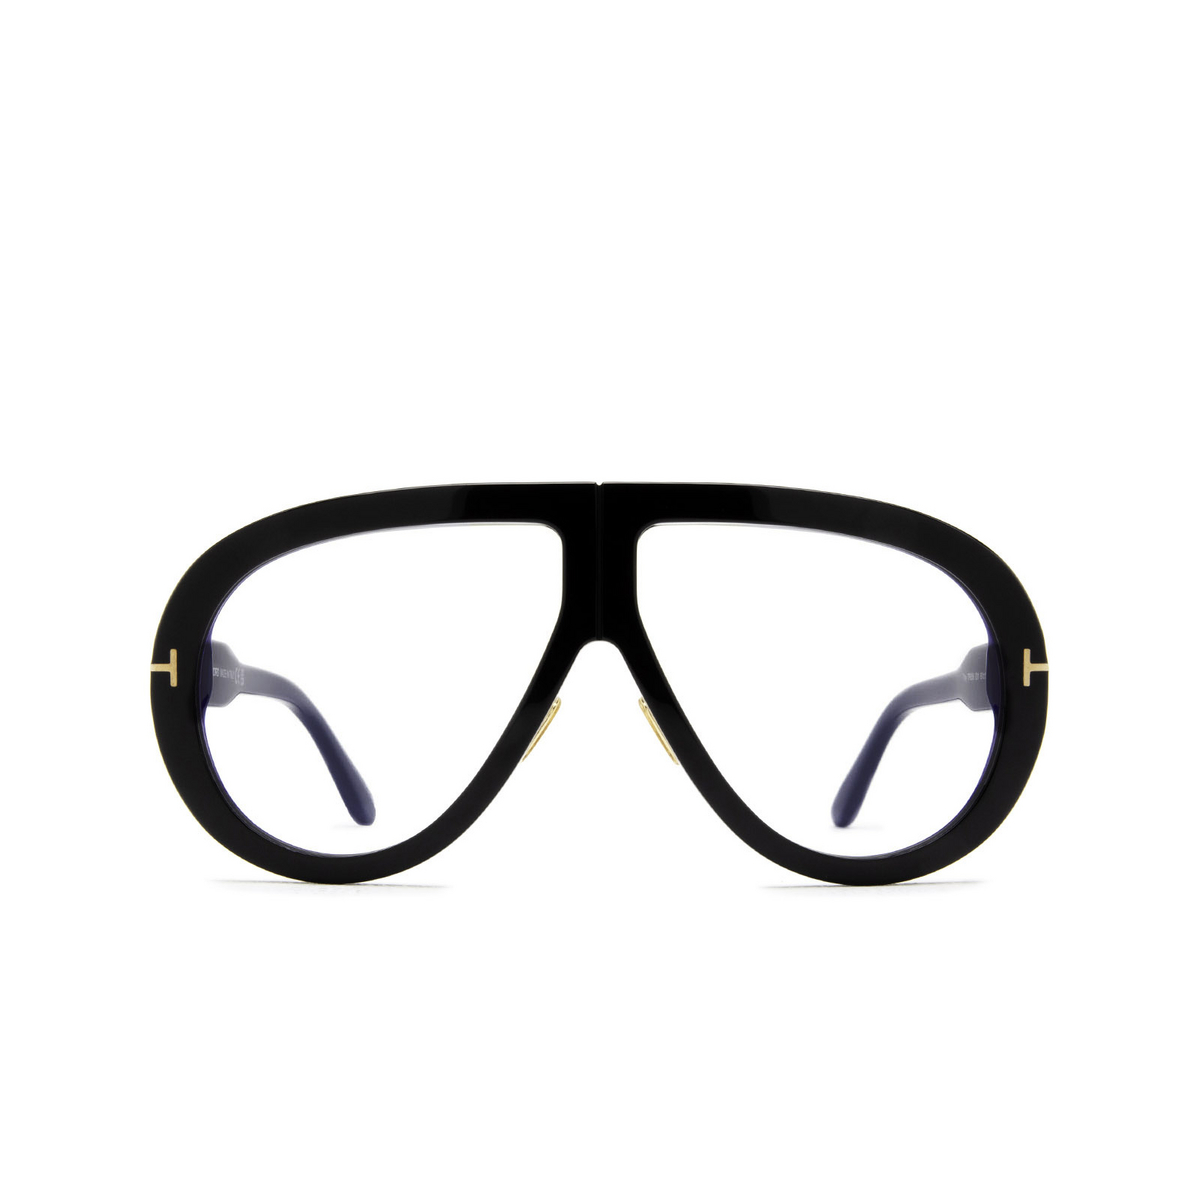 Tom Ford TROY Sunglasses 001 Black - front view